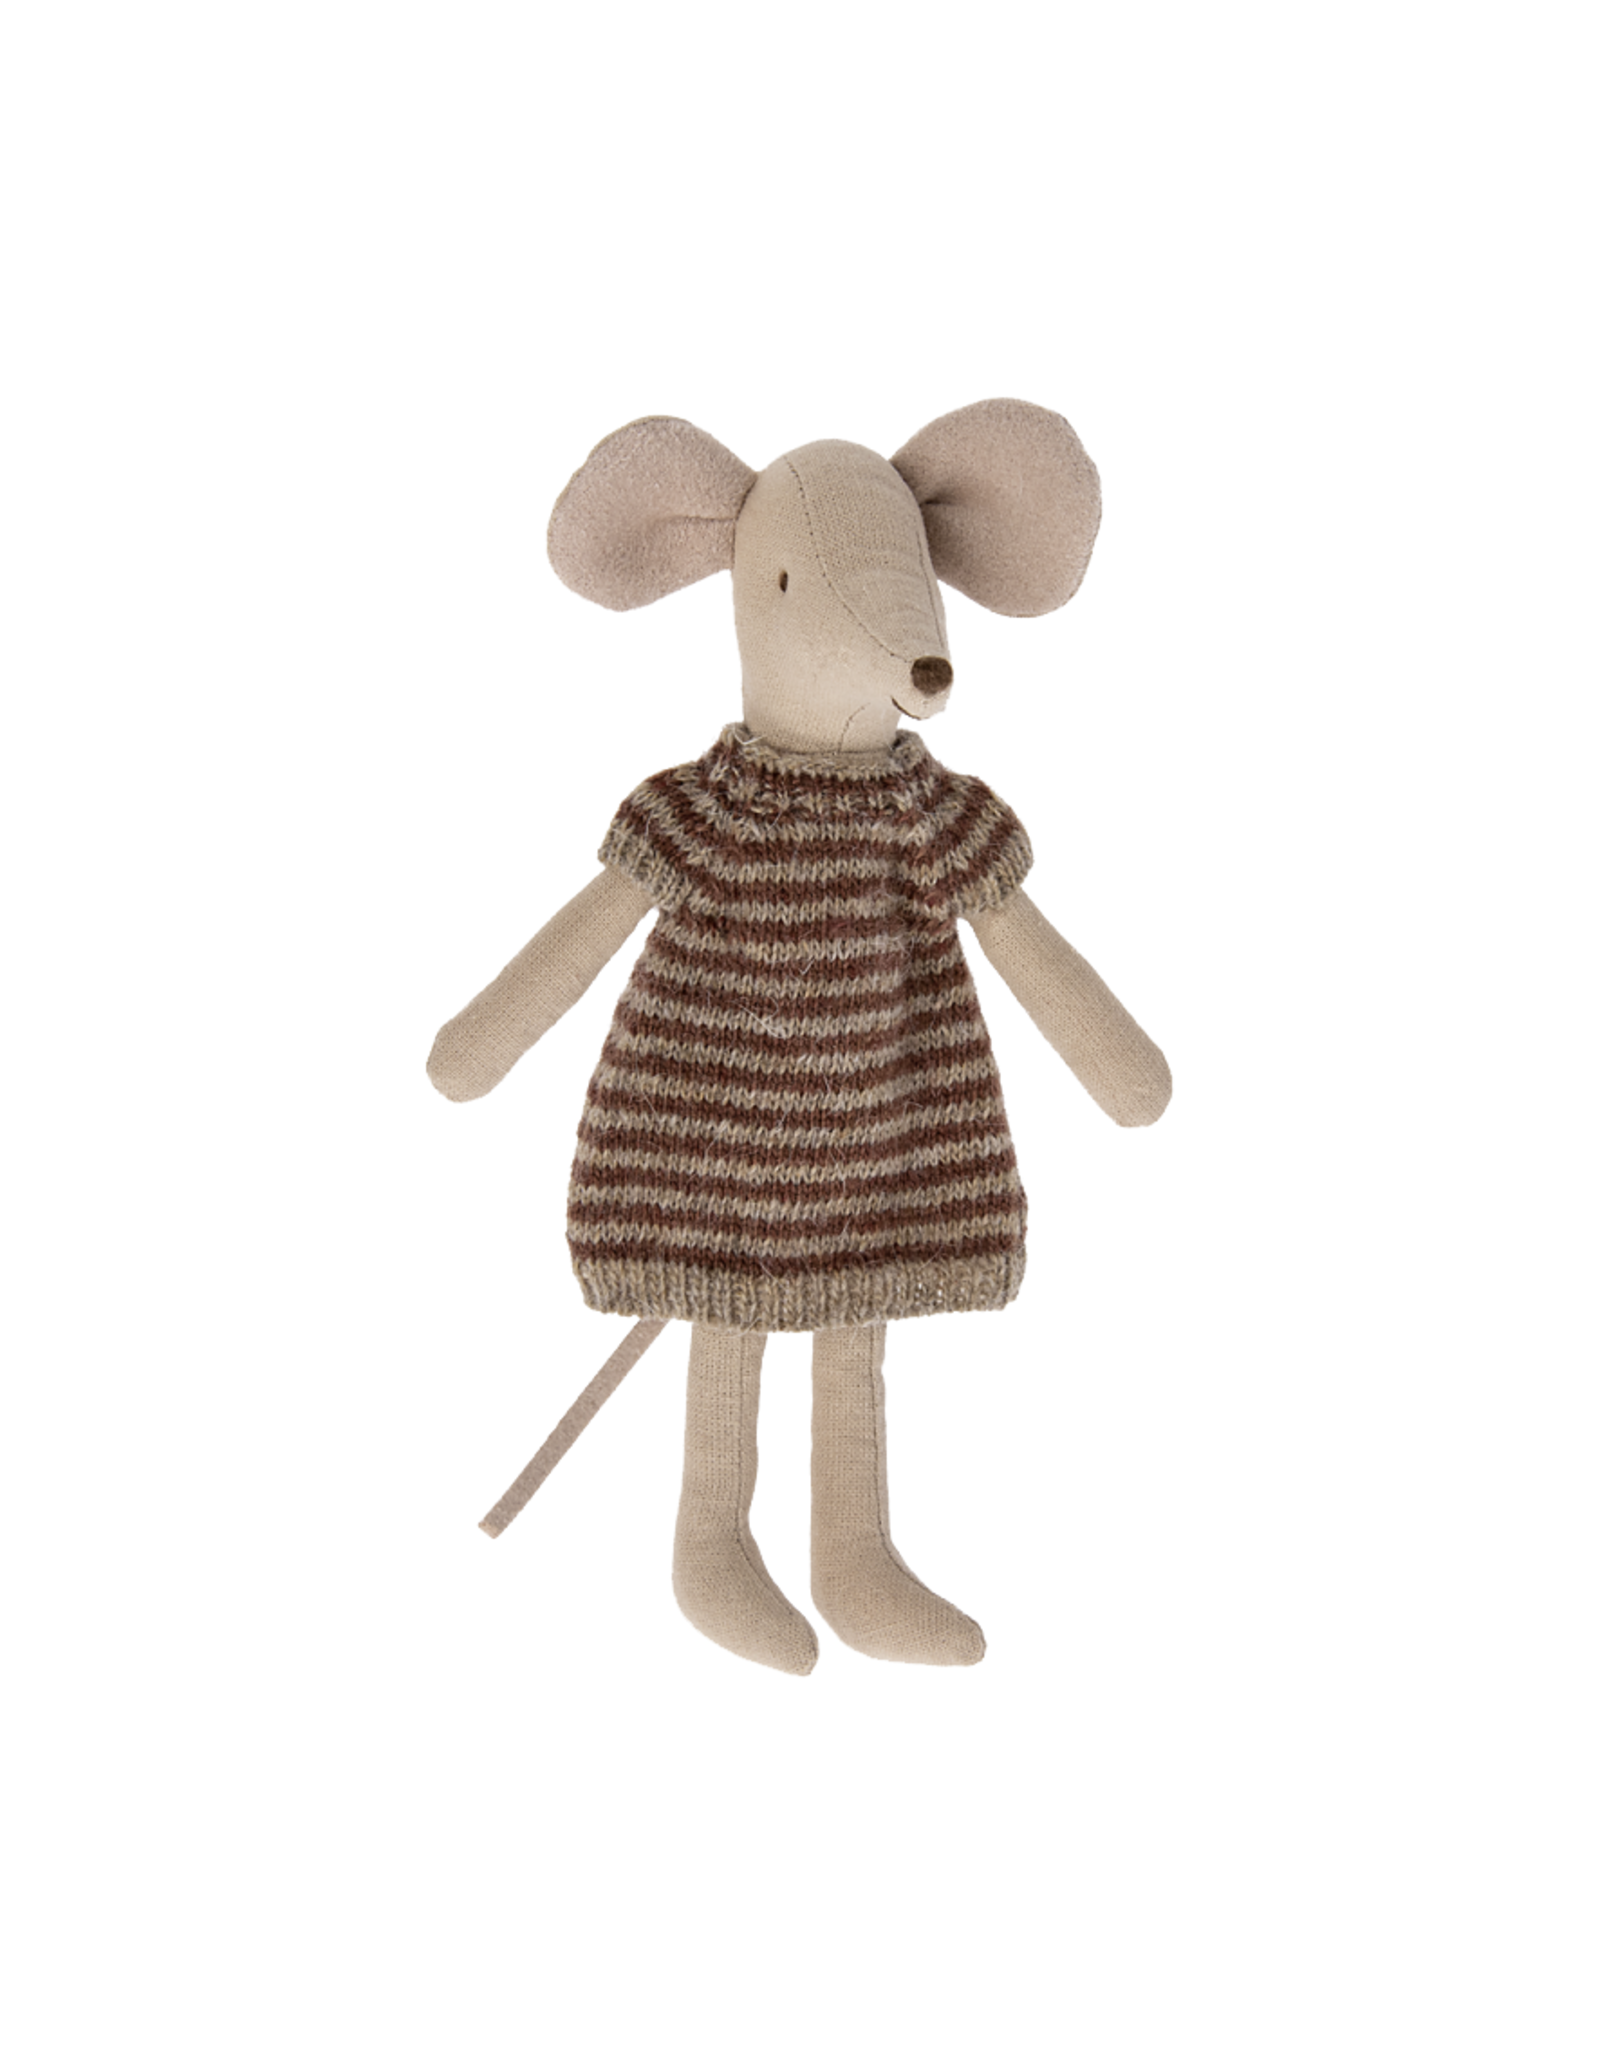 Maileg Mum Mouse Outfit - Knit Sweater Dress